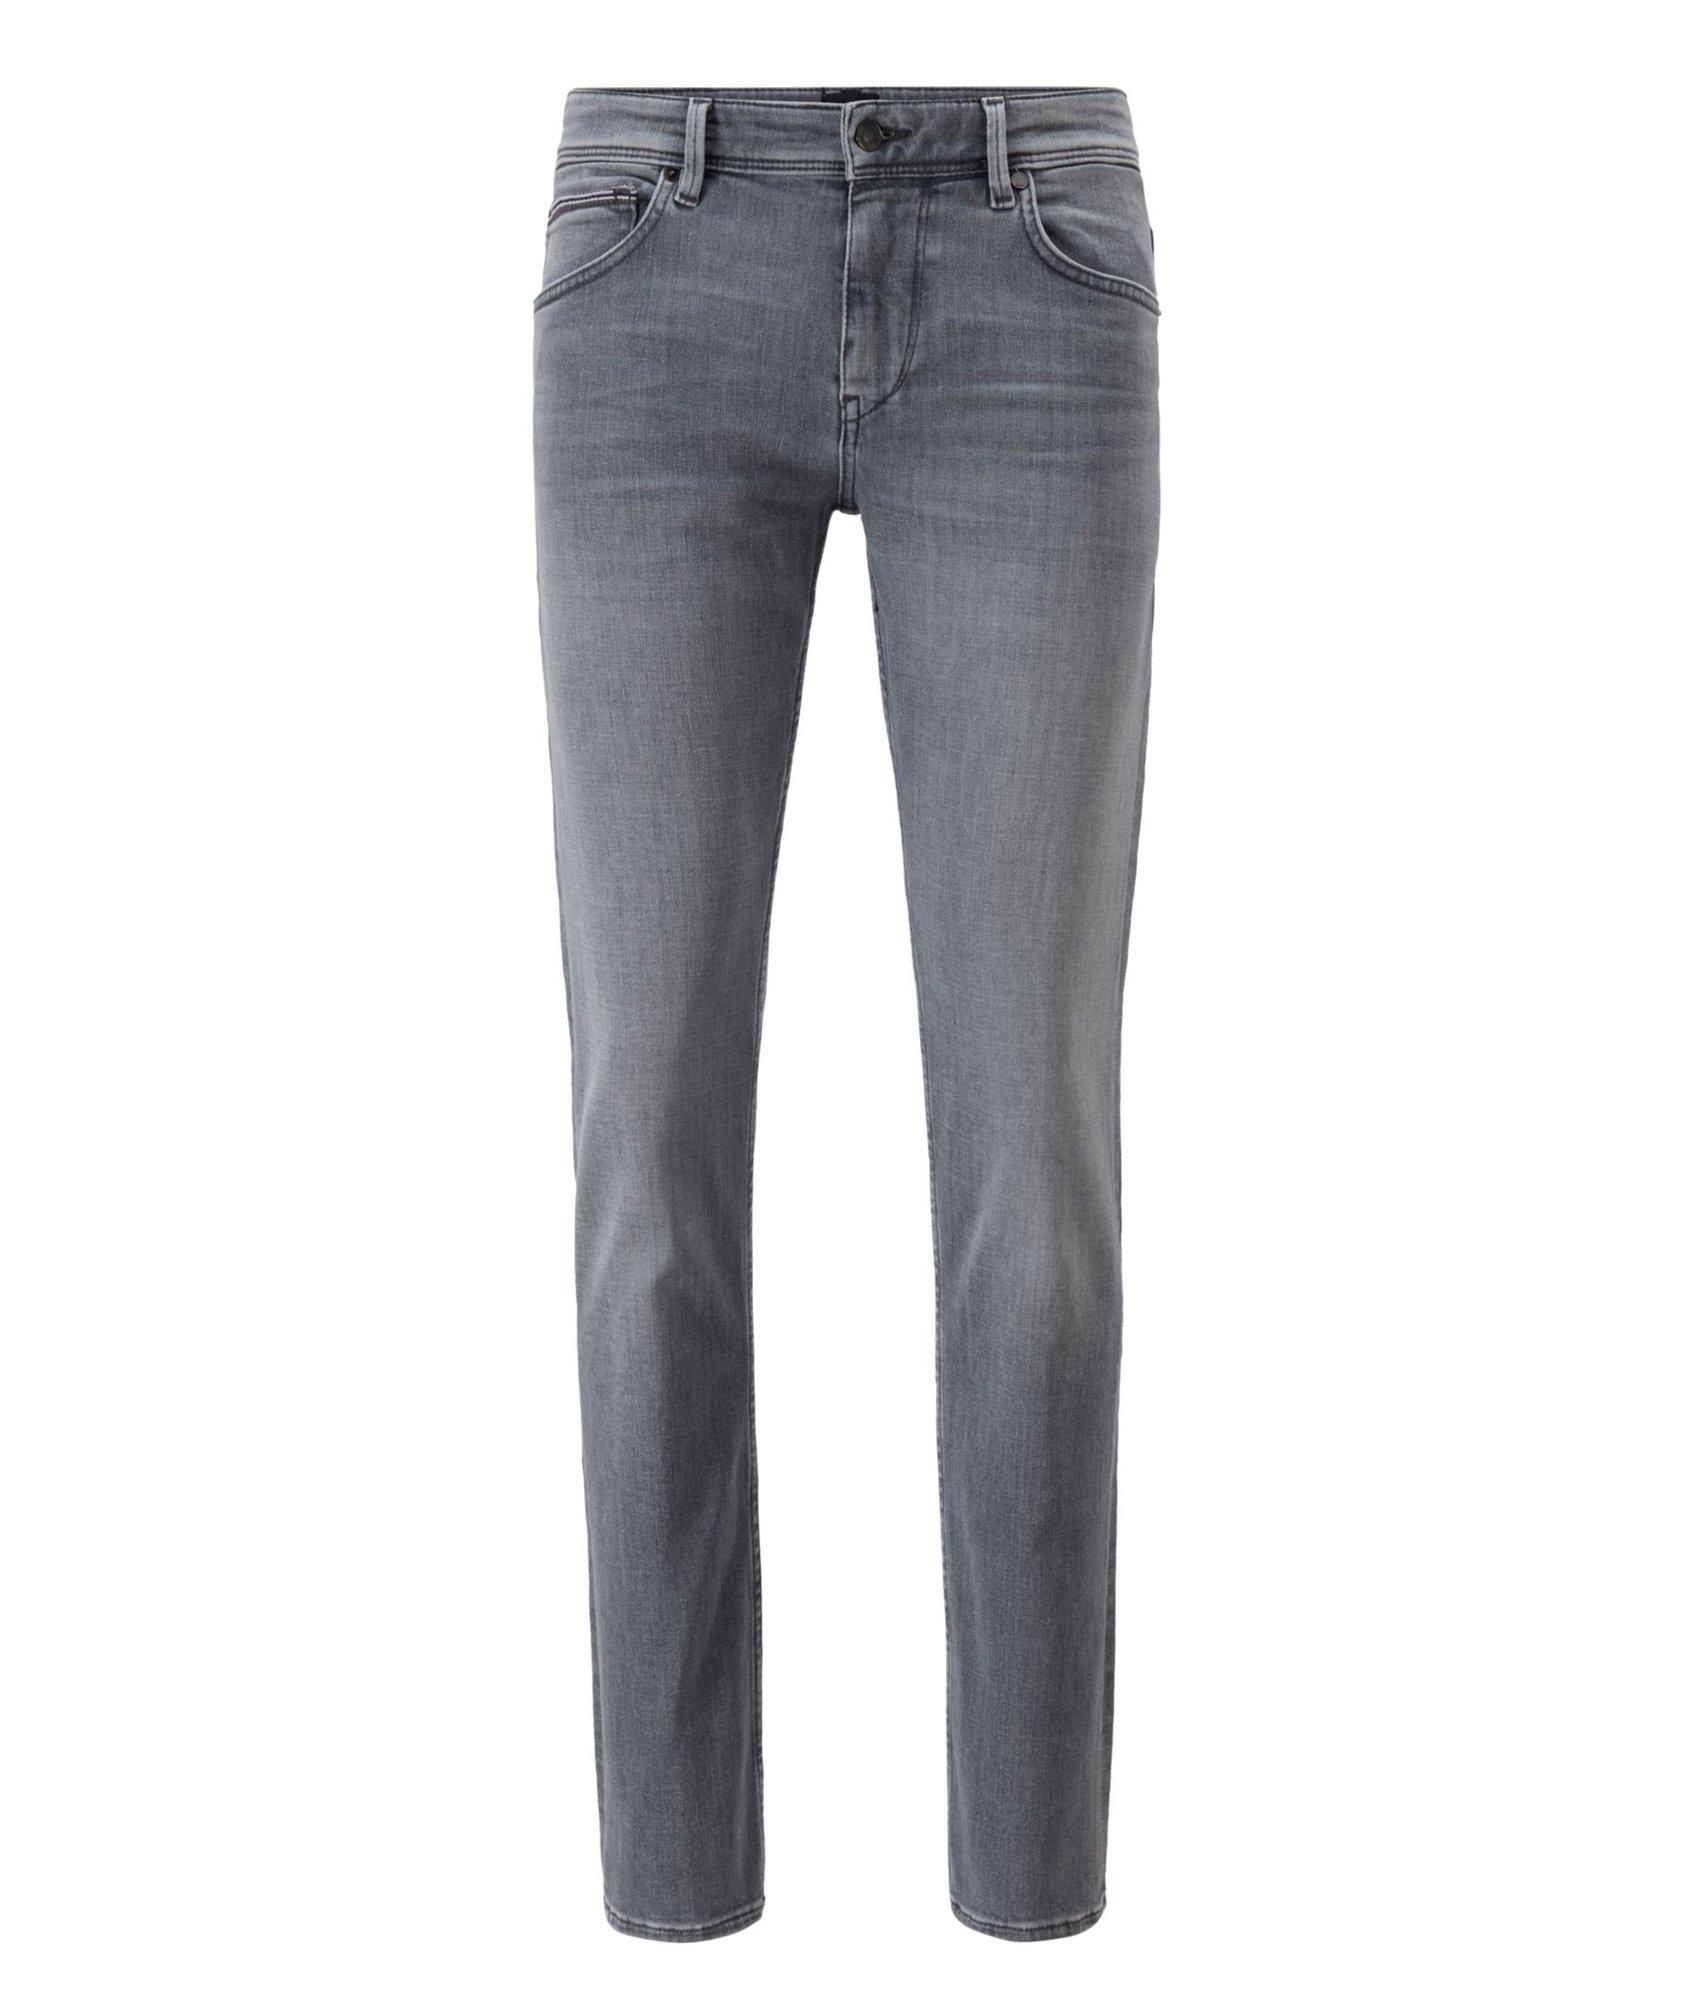 Slim Fit Soft Touch Jeans image 0